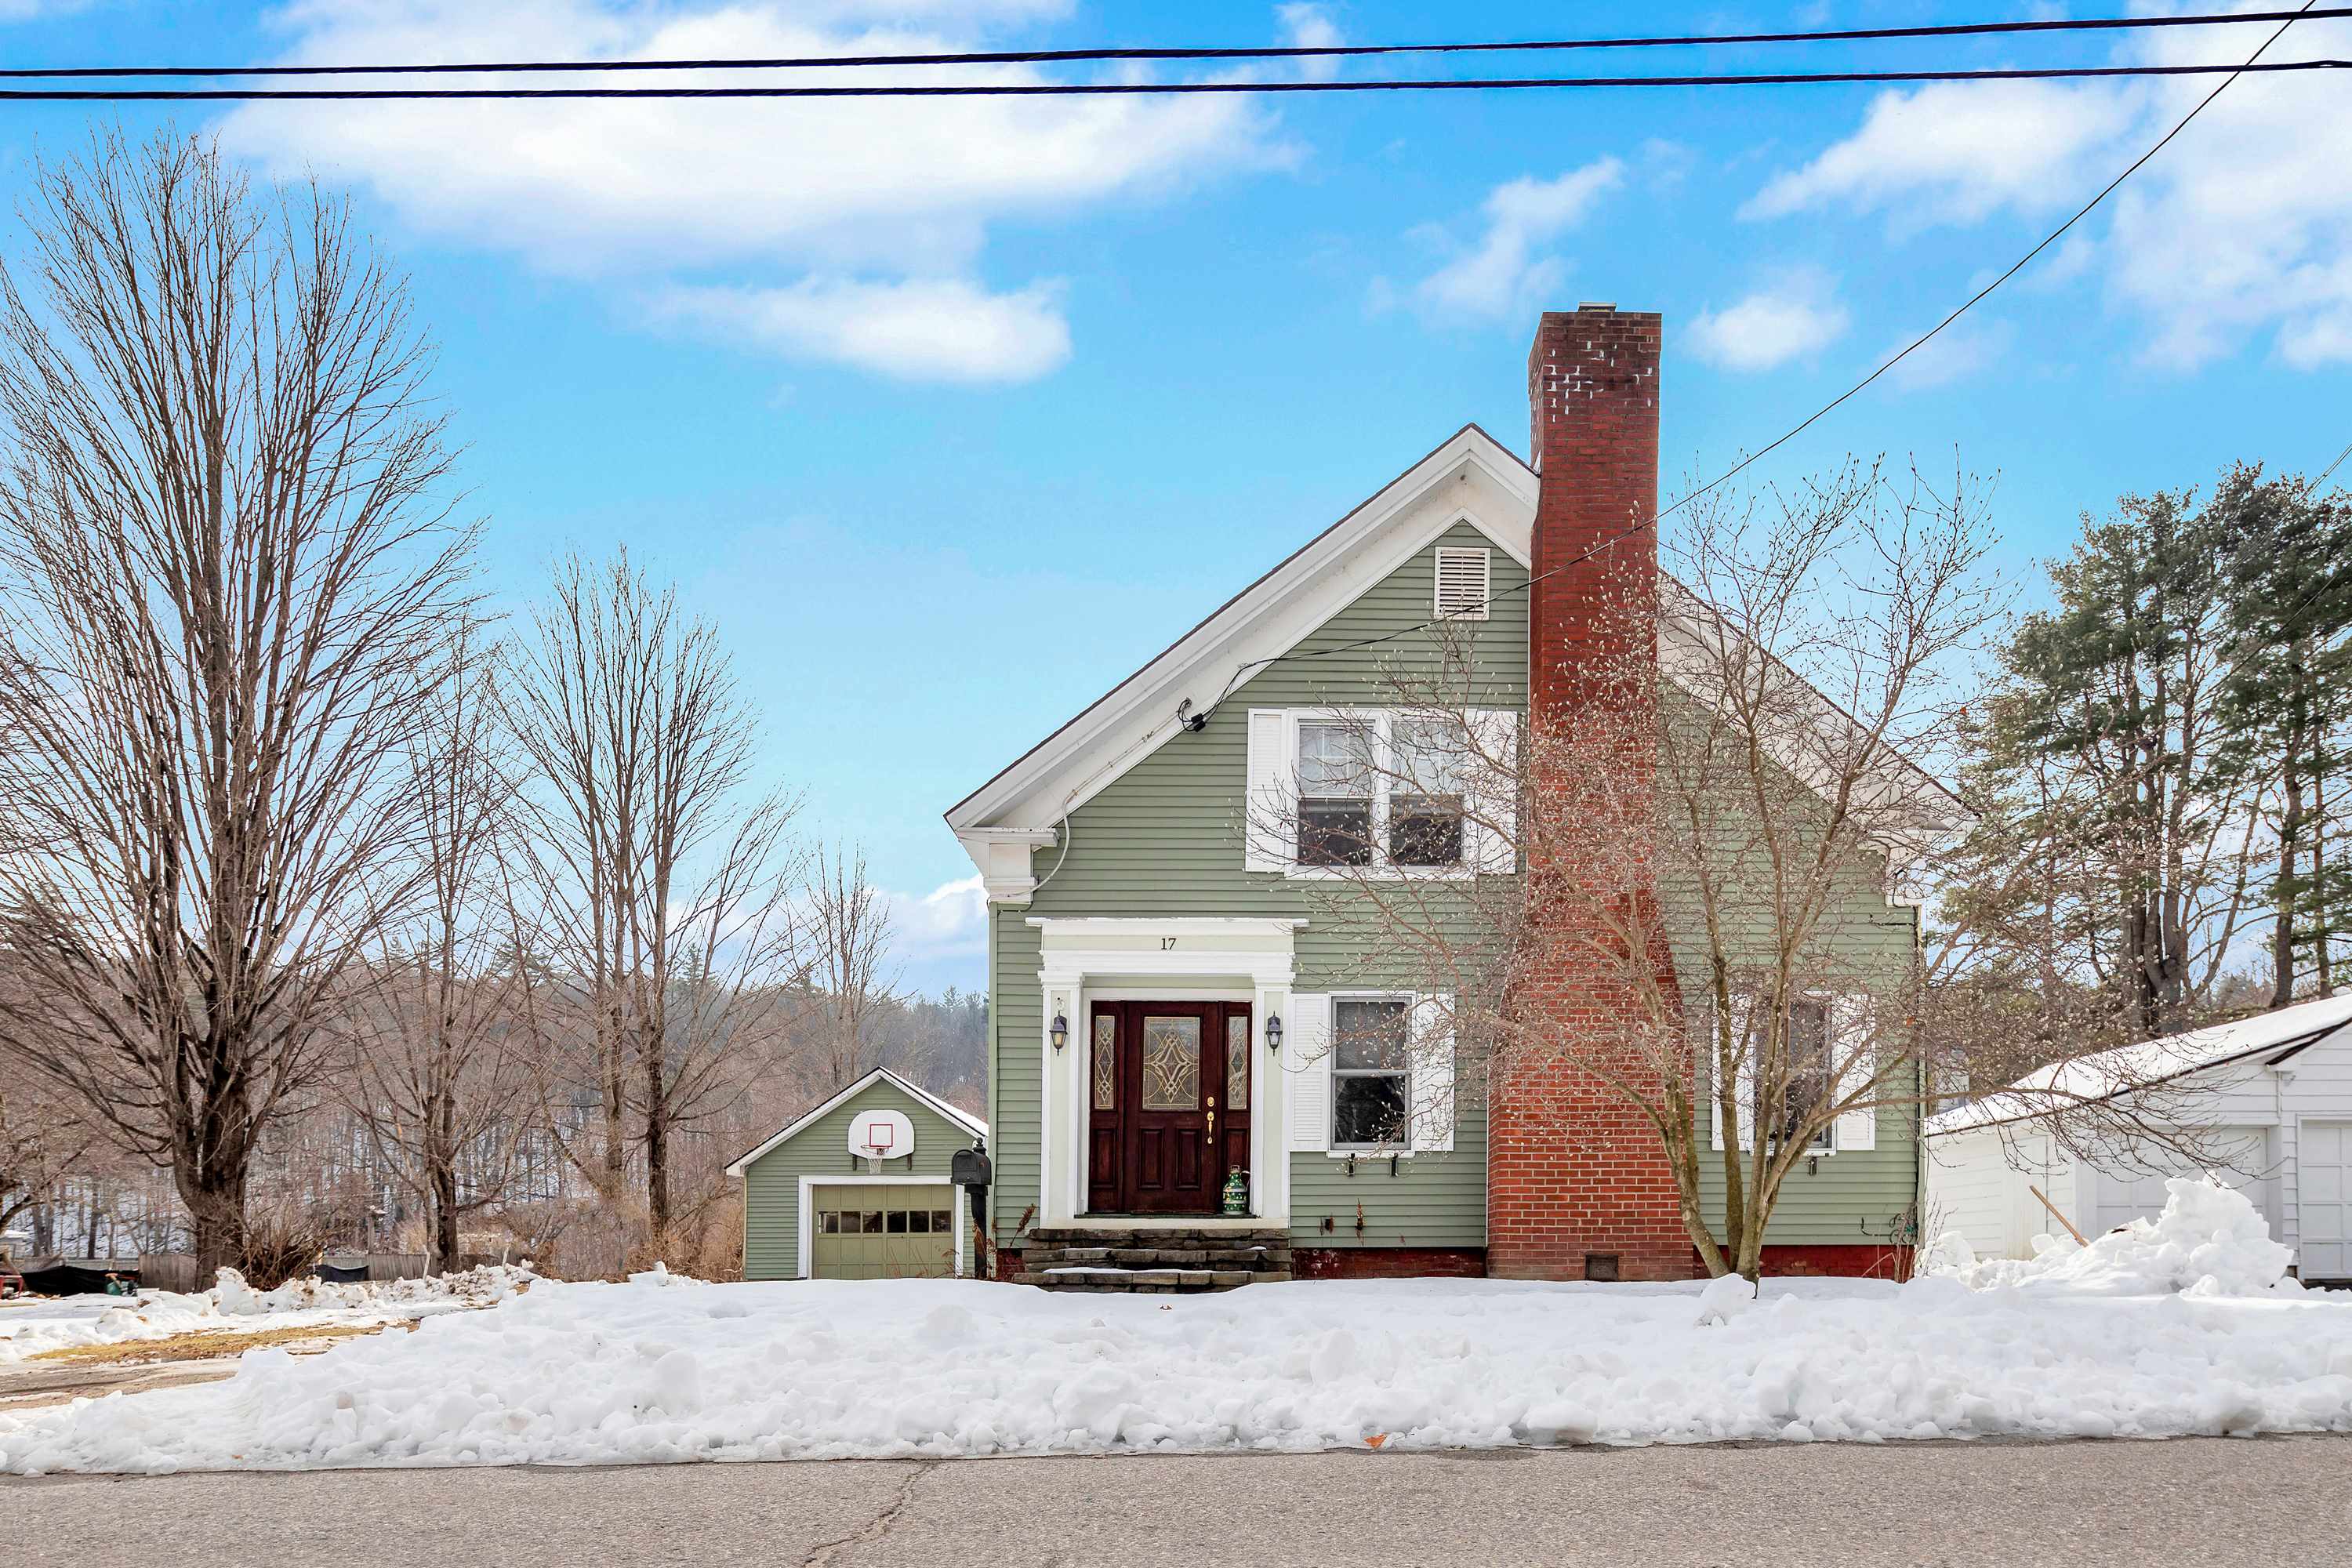 VILLAGE OF LUDLOW IN TOWN OF LUDLOW VT Home for sale $$375,000 | $177 per sq.ft.